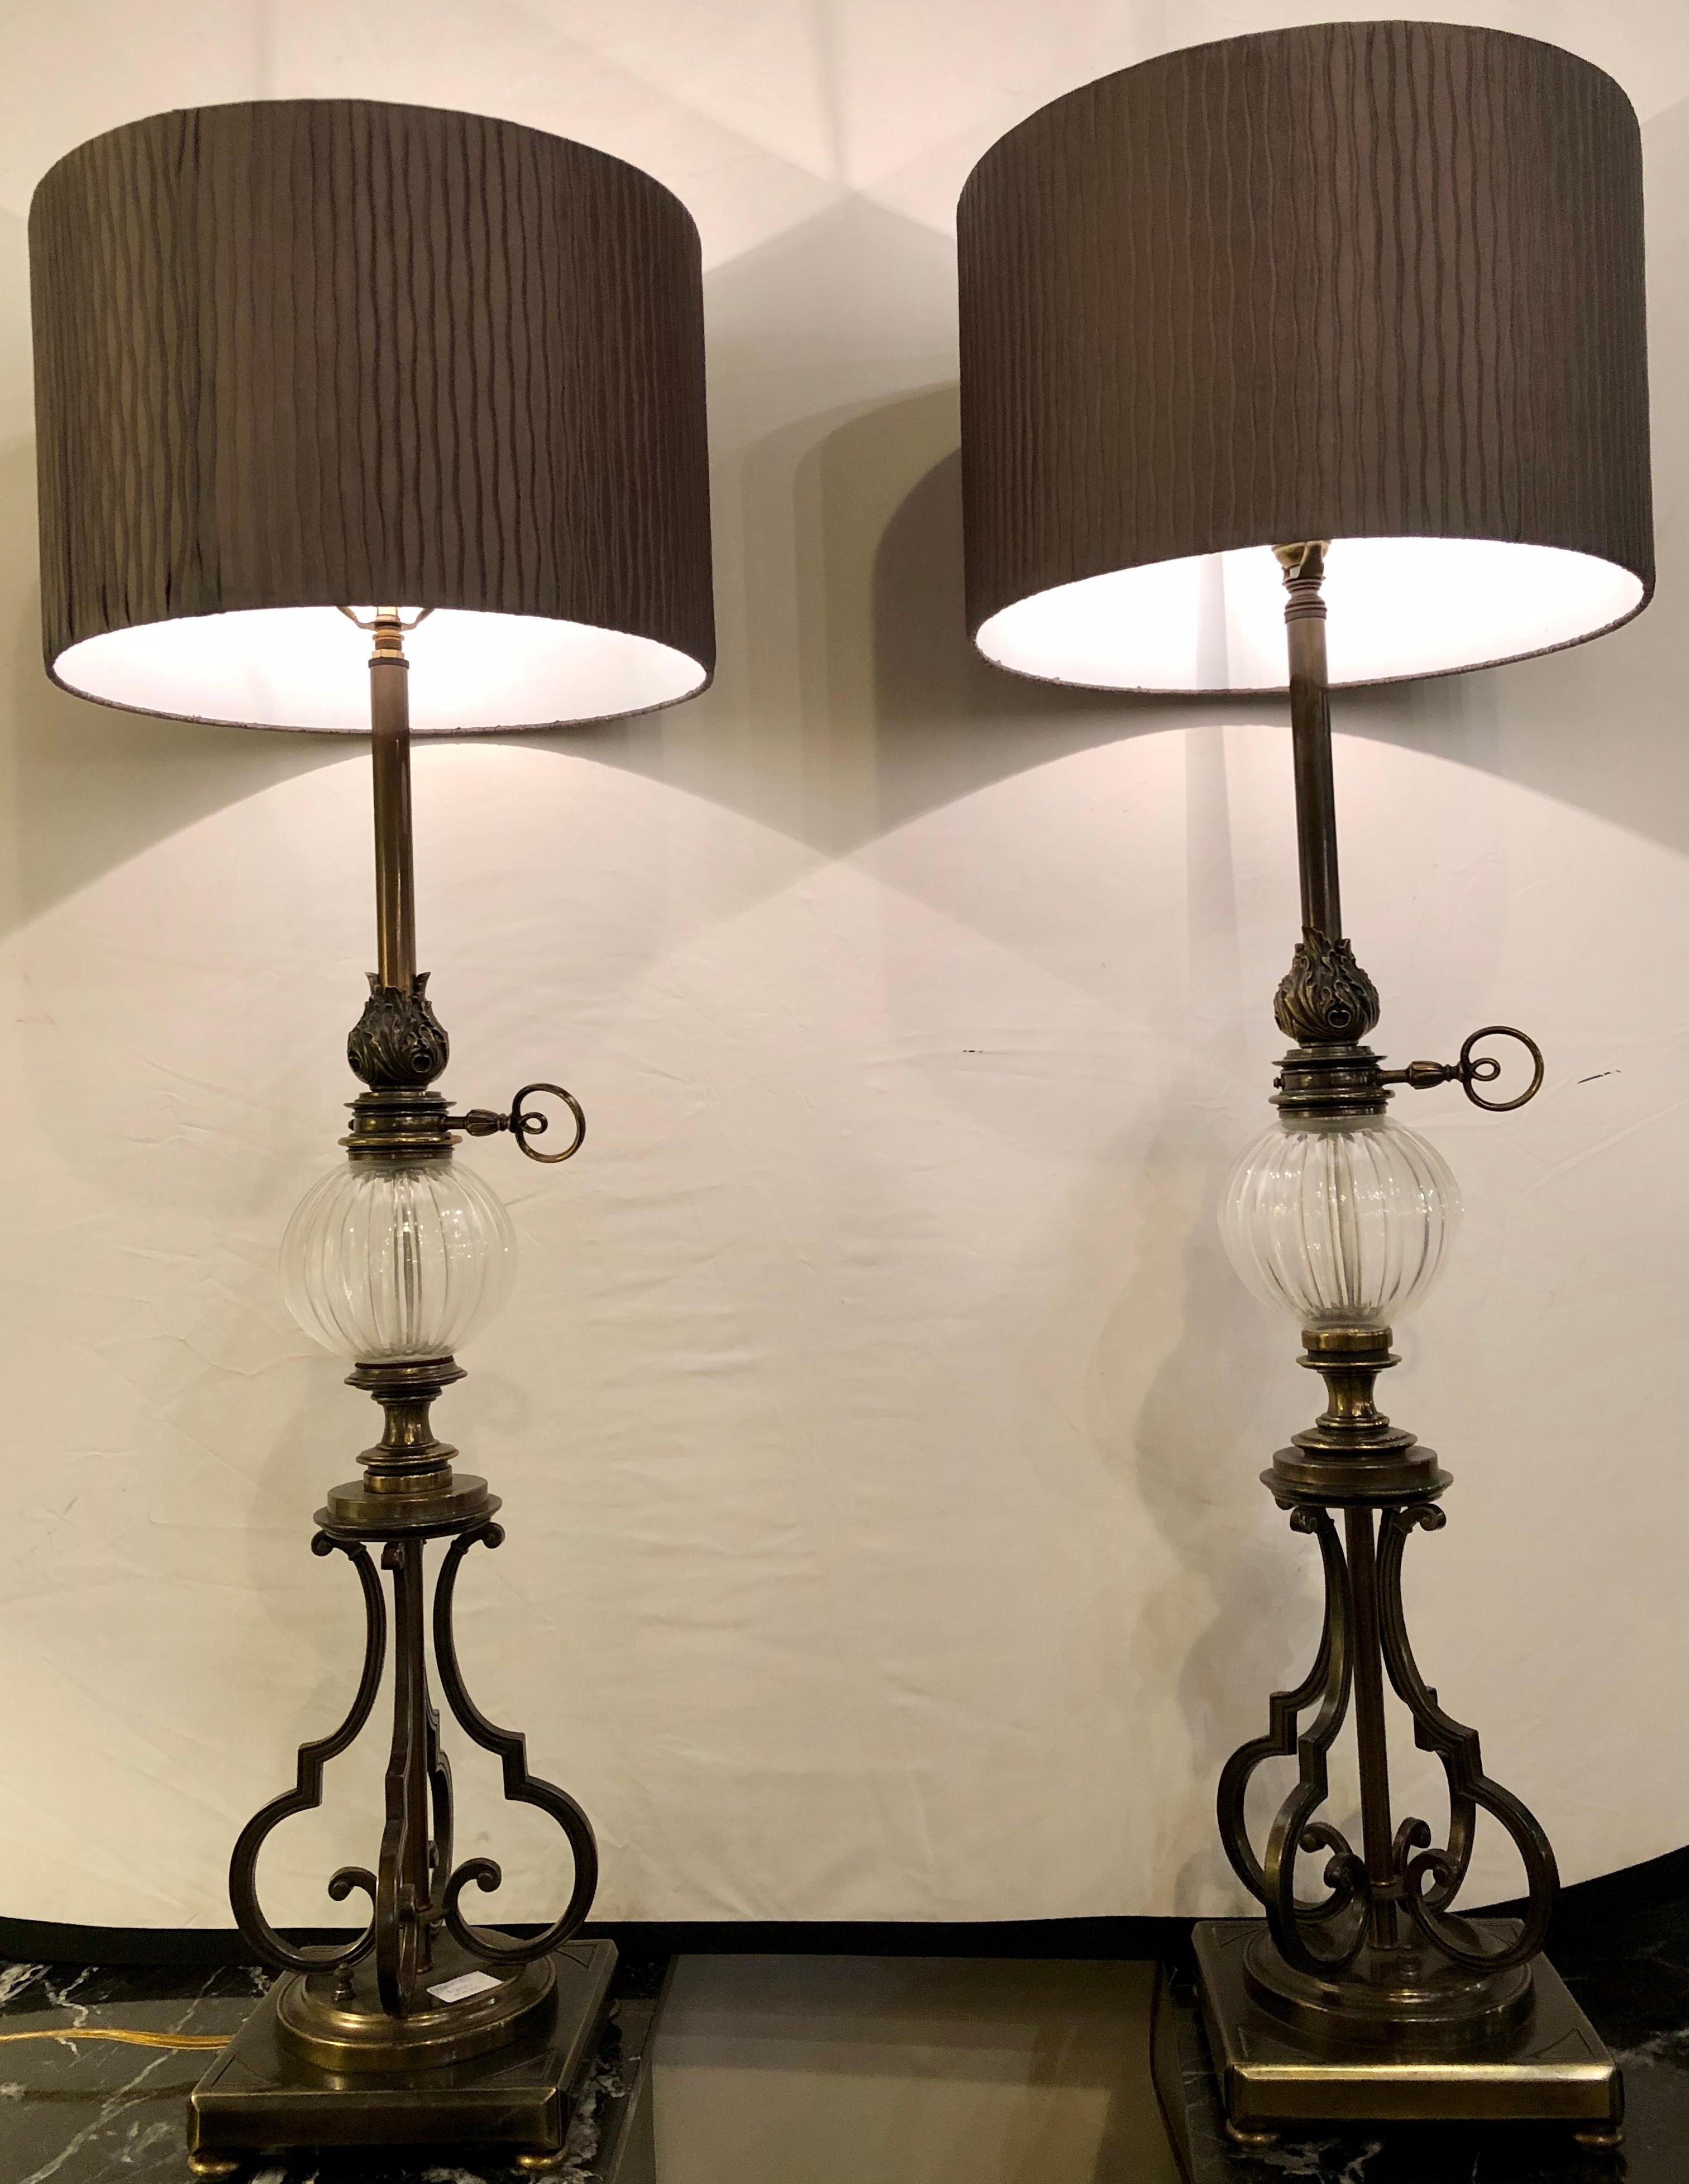 Pair of large Stiffel oil lamps each electrified with lovely custom matching lamp shades.

SX.